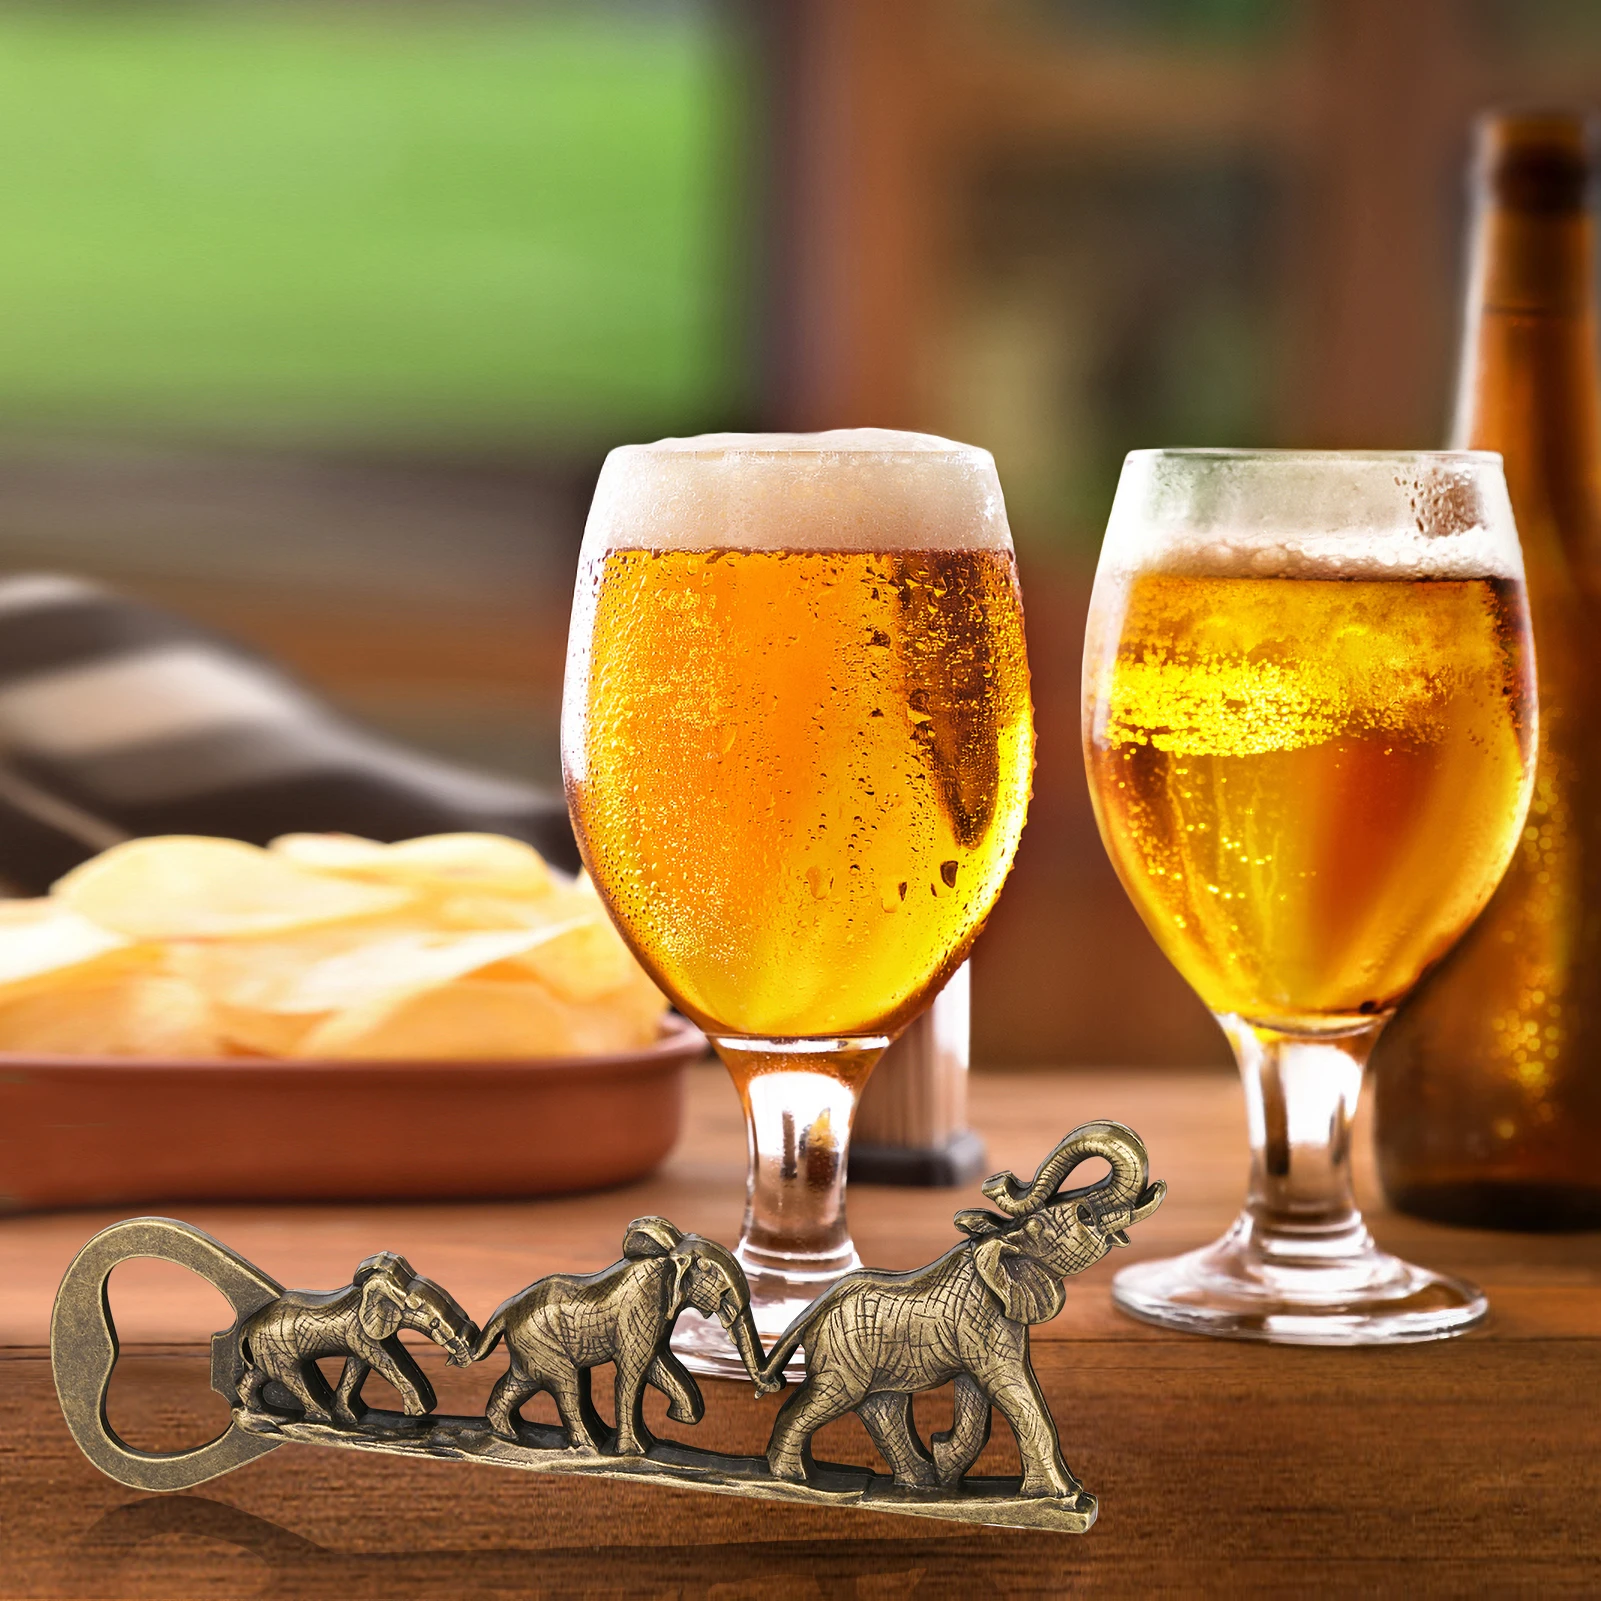 Drinking Accessories & Beer Gifts